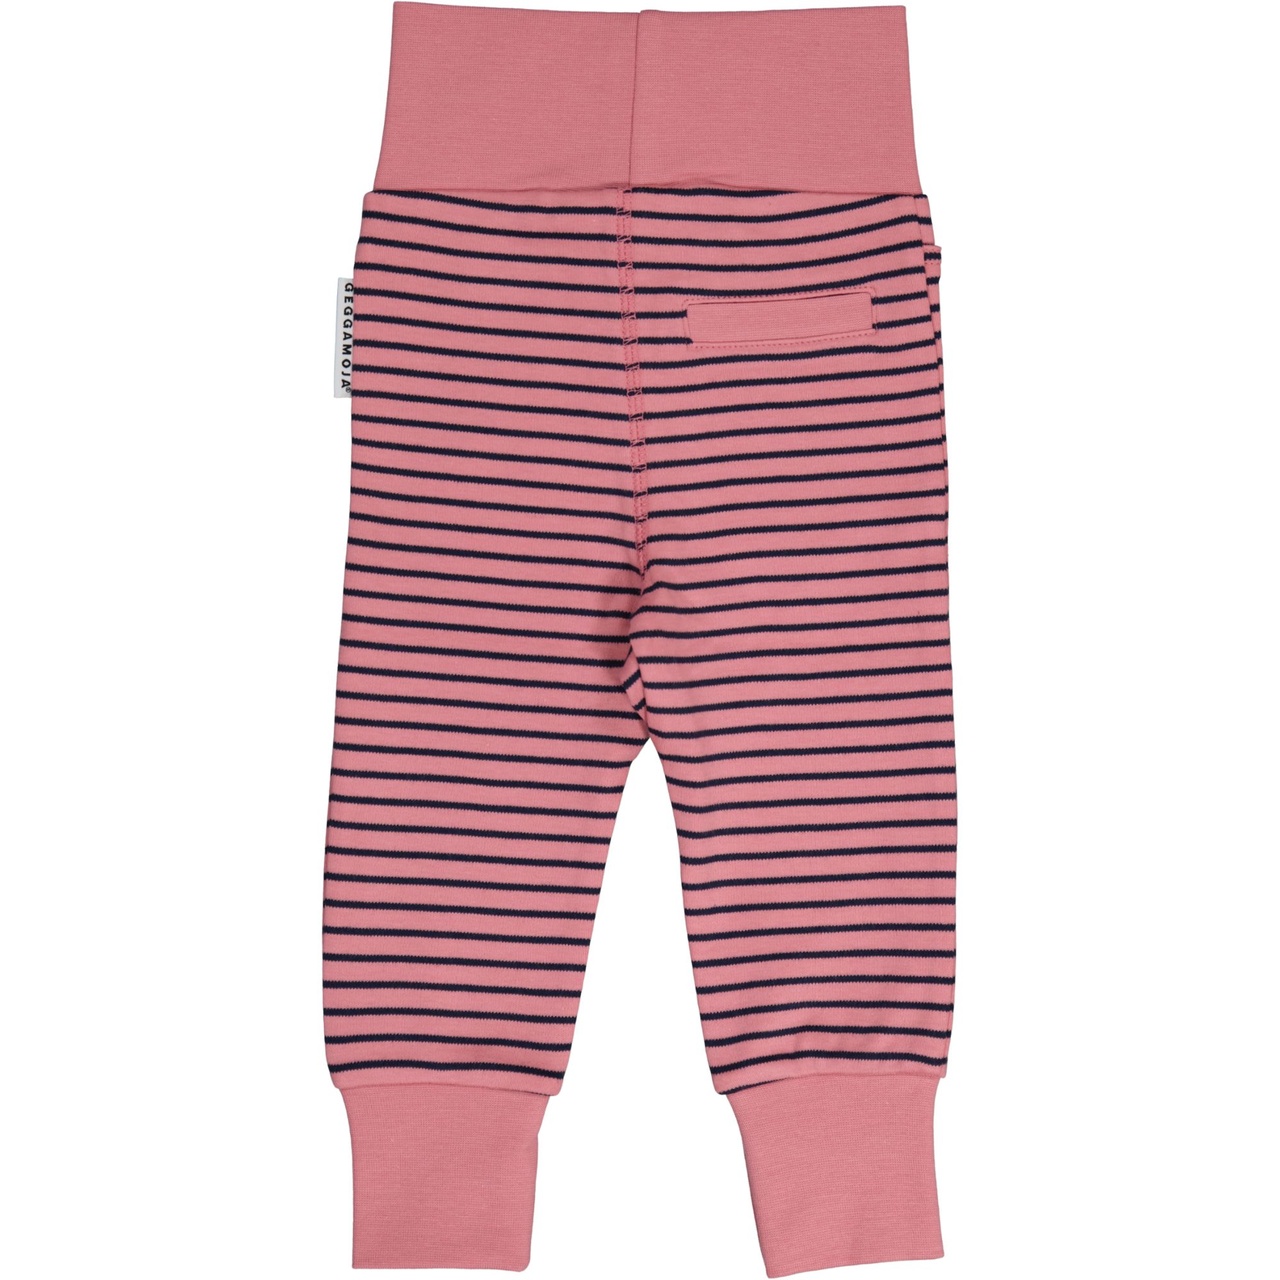 Baby trouser Pink/navy 74/80